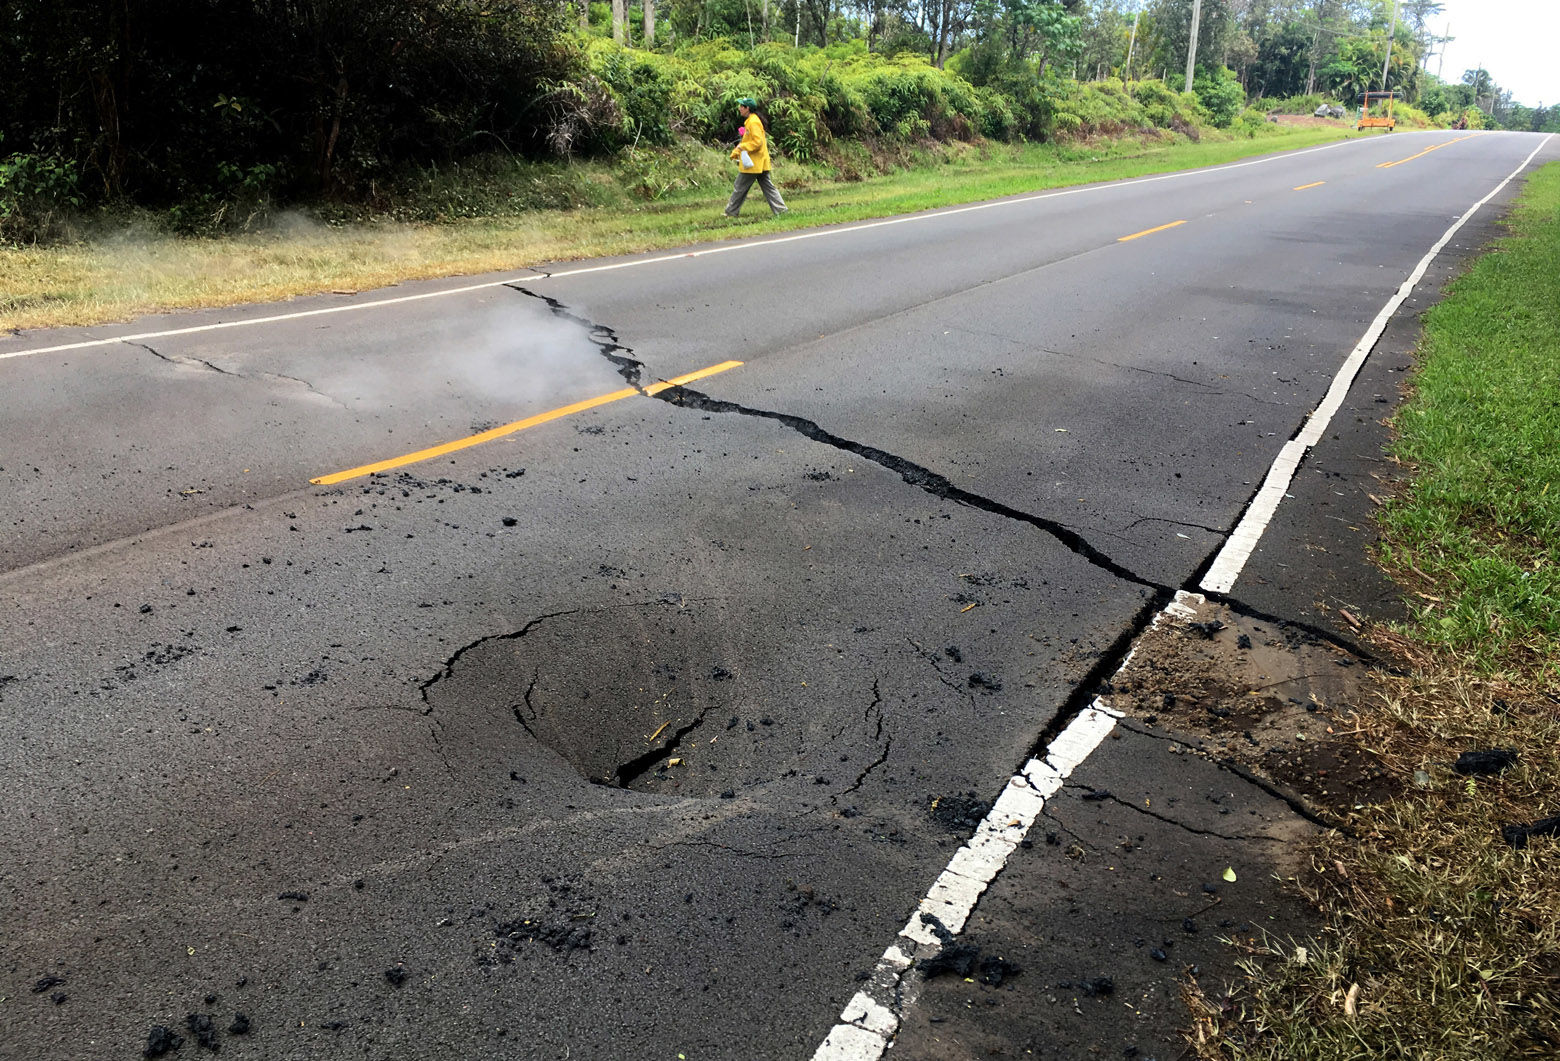 PAHOA, HI - MAY 5: In this handout photo provided by the U.S. Geological Survey, a crack opened on Pohoiki Road just east of Leilani Street after the eruption of Hawaii's Kilauea volcano on May 5, 2018 in the Leilani Estates subdivision near Pahoa, Hawaii. The governor of Hawaii has declared a local state of emergency near the Mount Kilauea volcano after it erupted following a 5.0-magnitude earthquake, forcing the evacuation of nearly 1,700 residents. (Photo by U.S. Geological Survey via Getty Images)